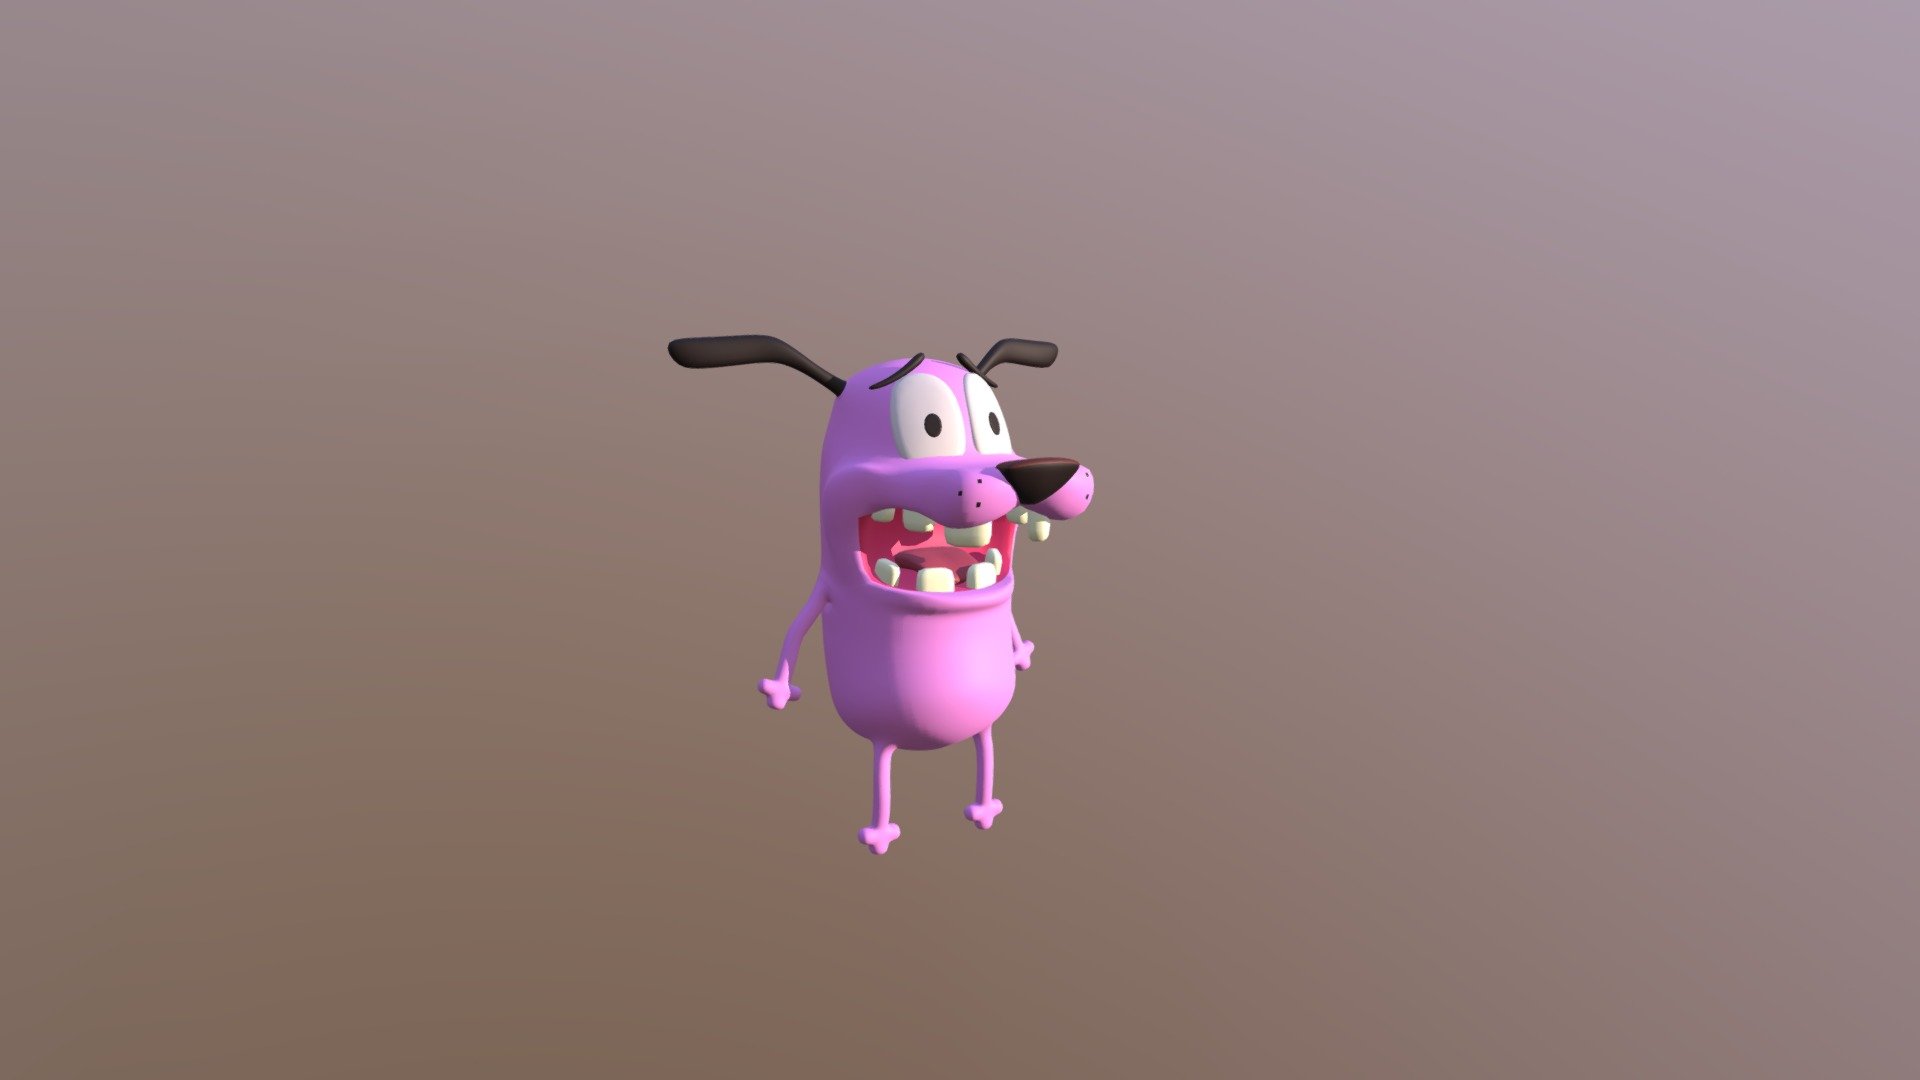 Cowardly chat the vr courage dog Adult Courage